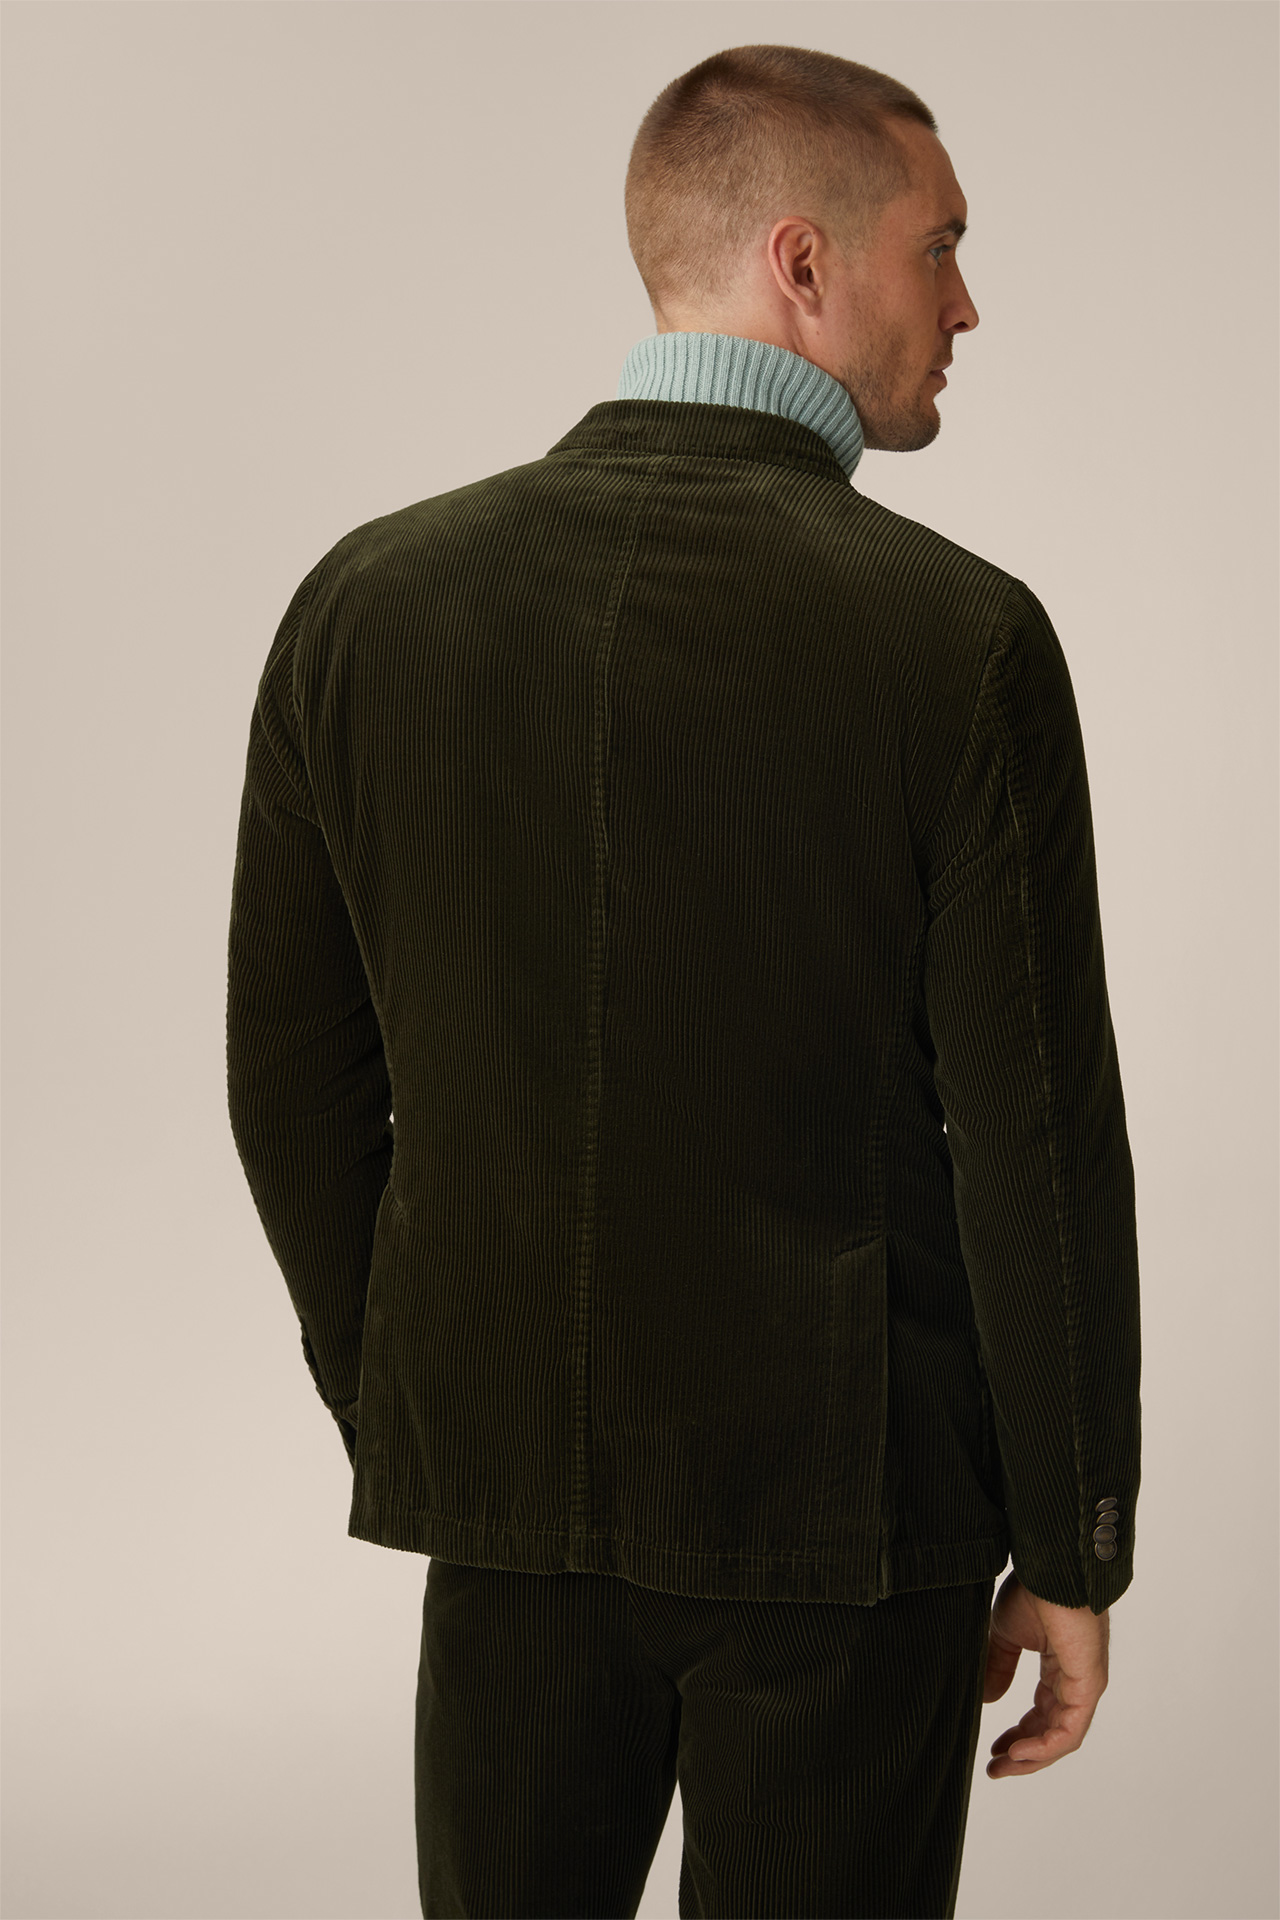  Satino Cord Modular Double-breasted Jacket in Olive